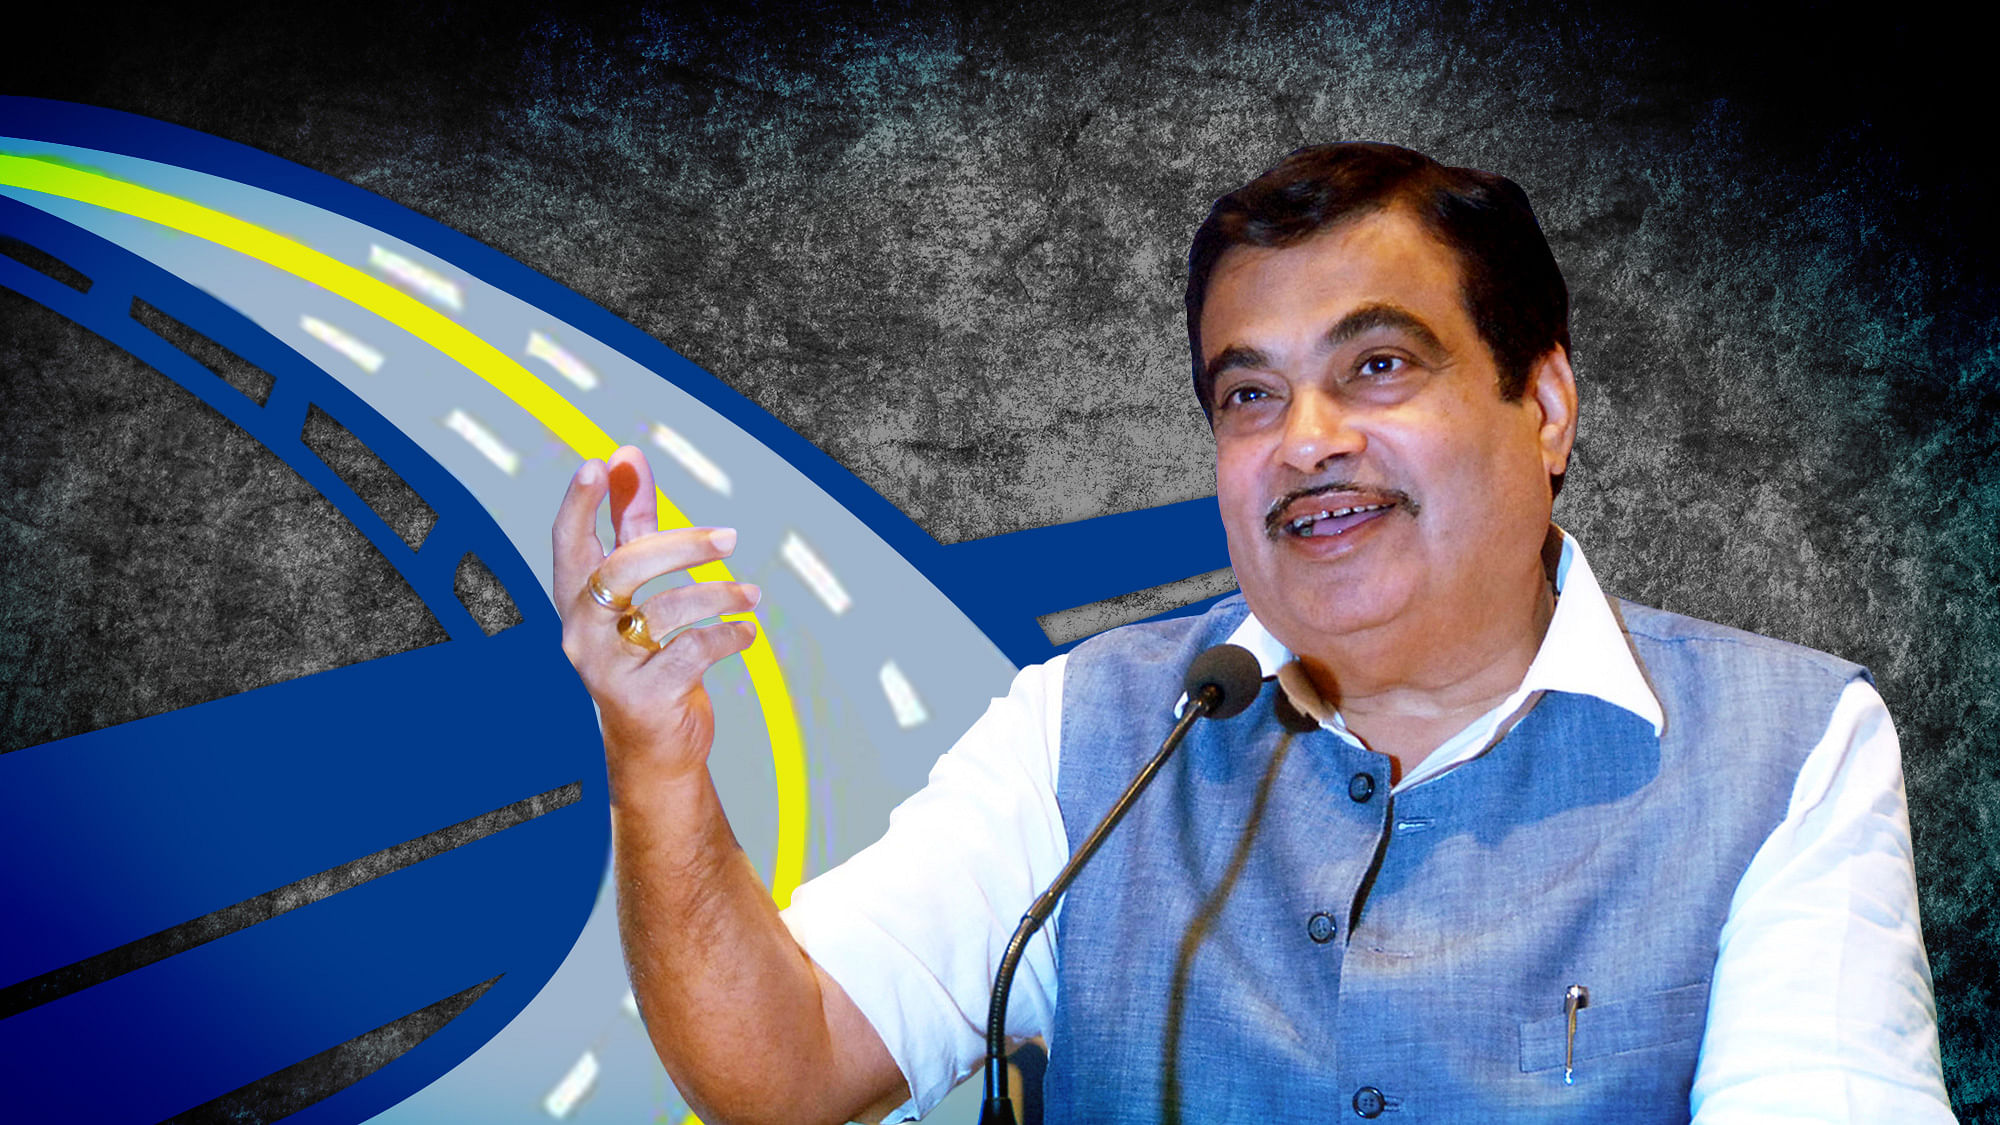 The Supreme Court expressed a desire to interact with Union Transport Minister Nitin Gadkari in open court on the Centre’s plan for introduction of electric vehicles(EVs).